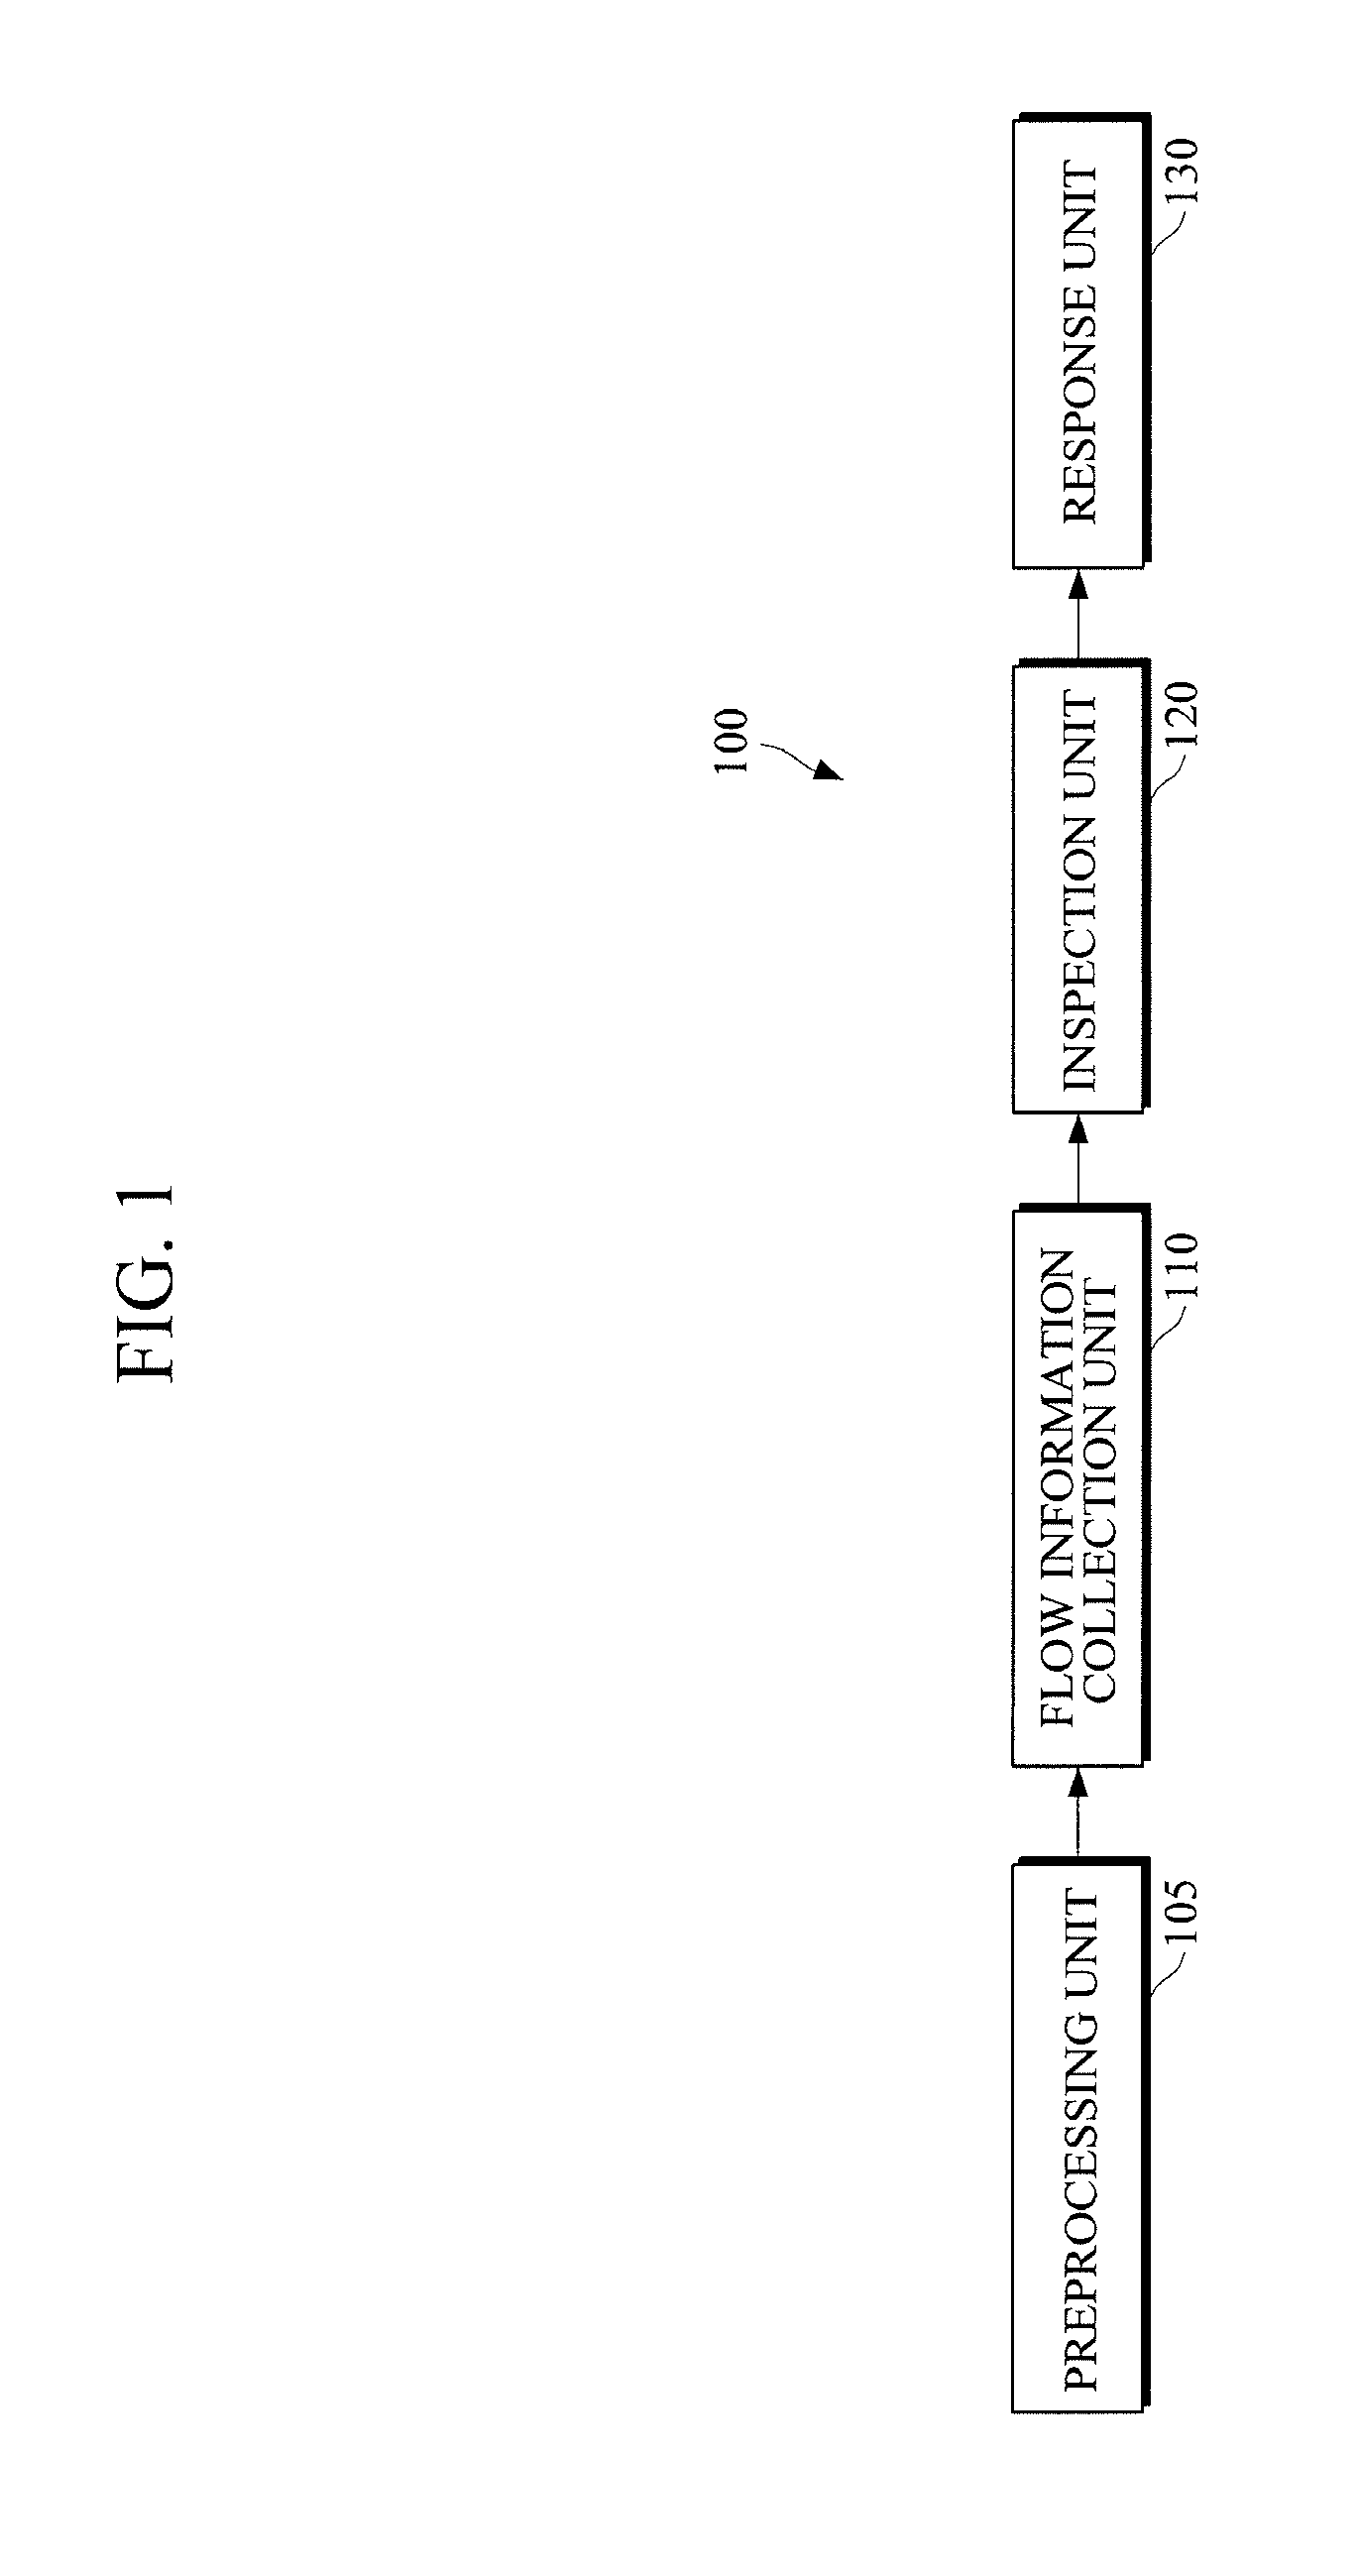 DDoS attack detection and defense apparatus and method using packet data